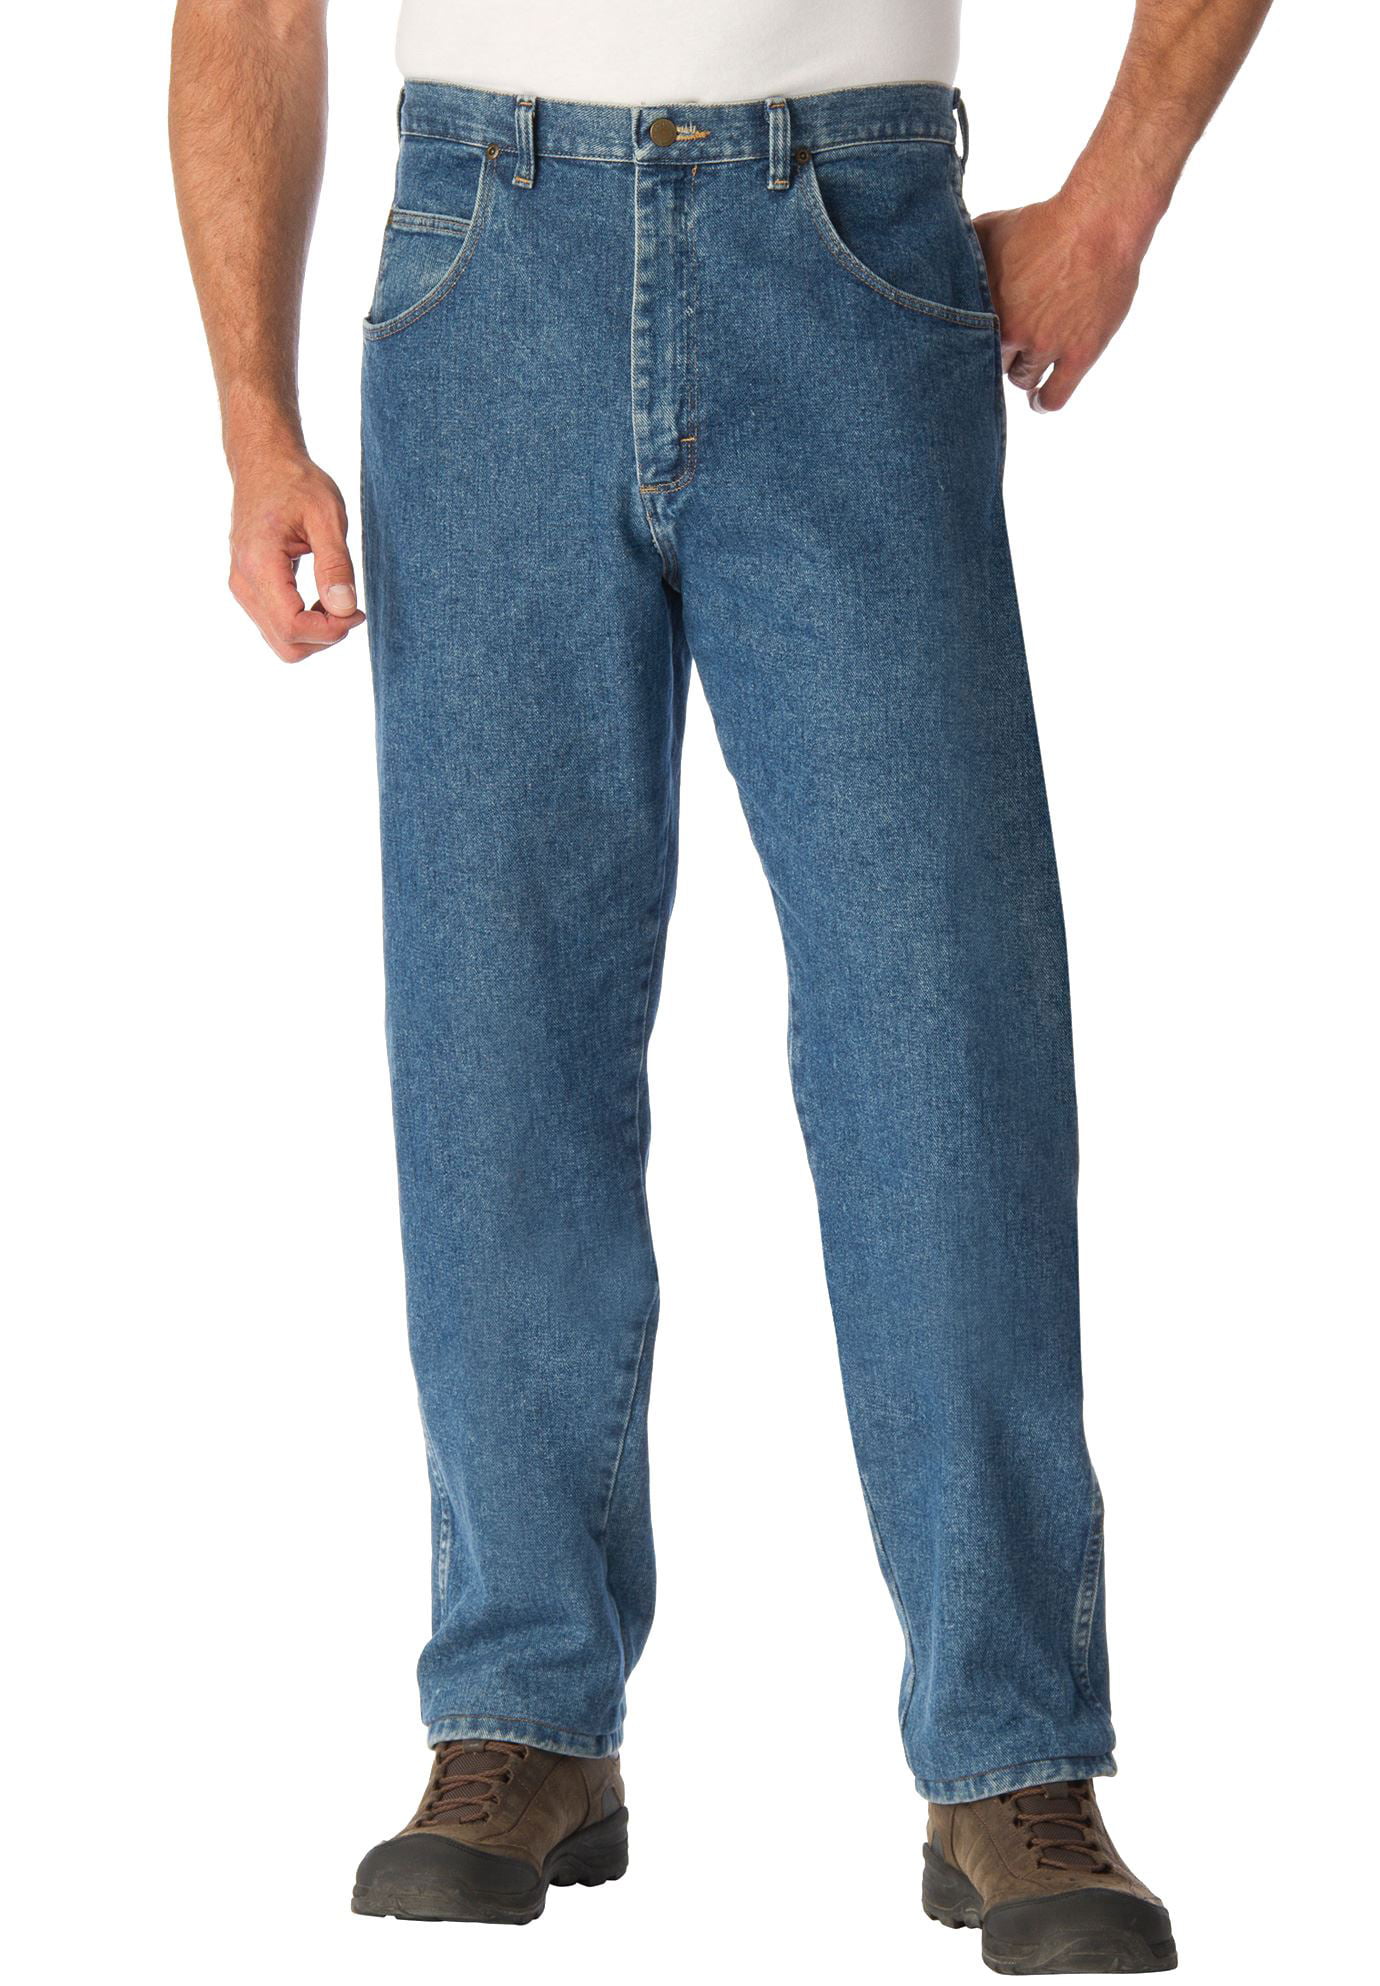 Kingsize - Men's Big & Tall Relaxed Fit Classic Jeans By Wrangler ...